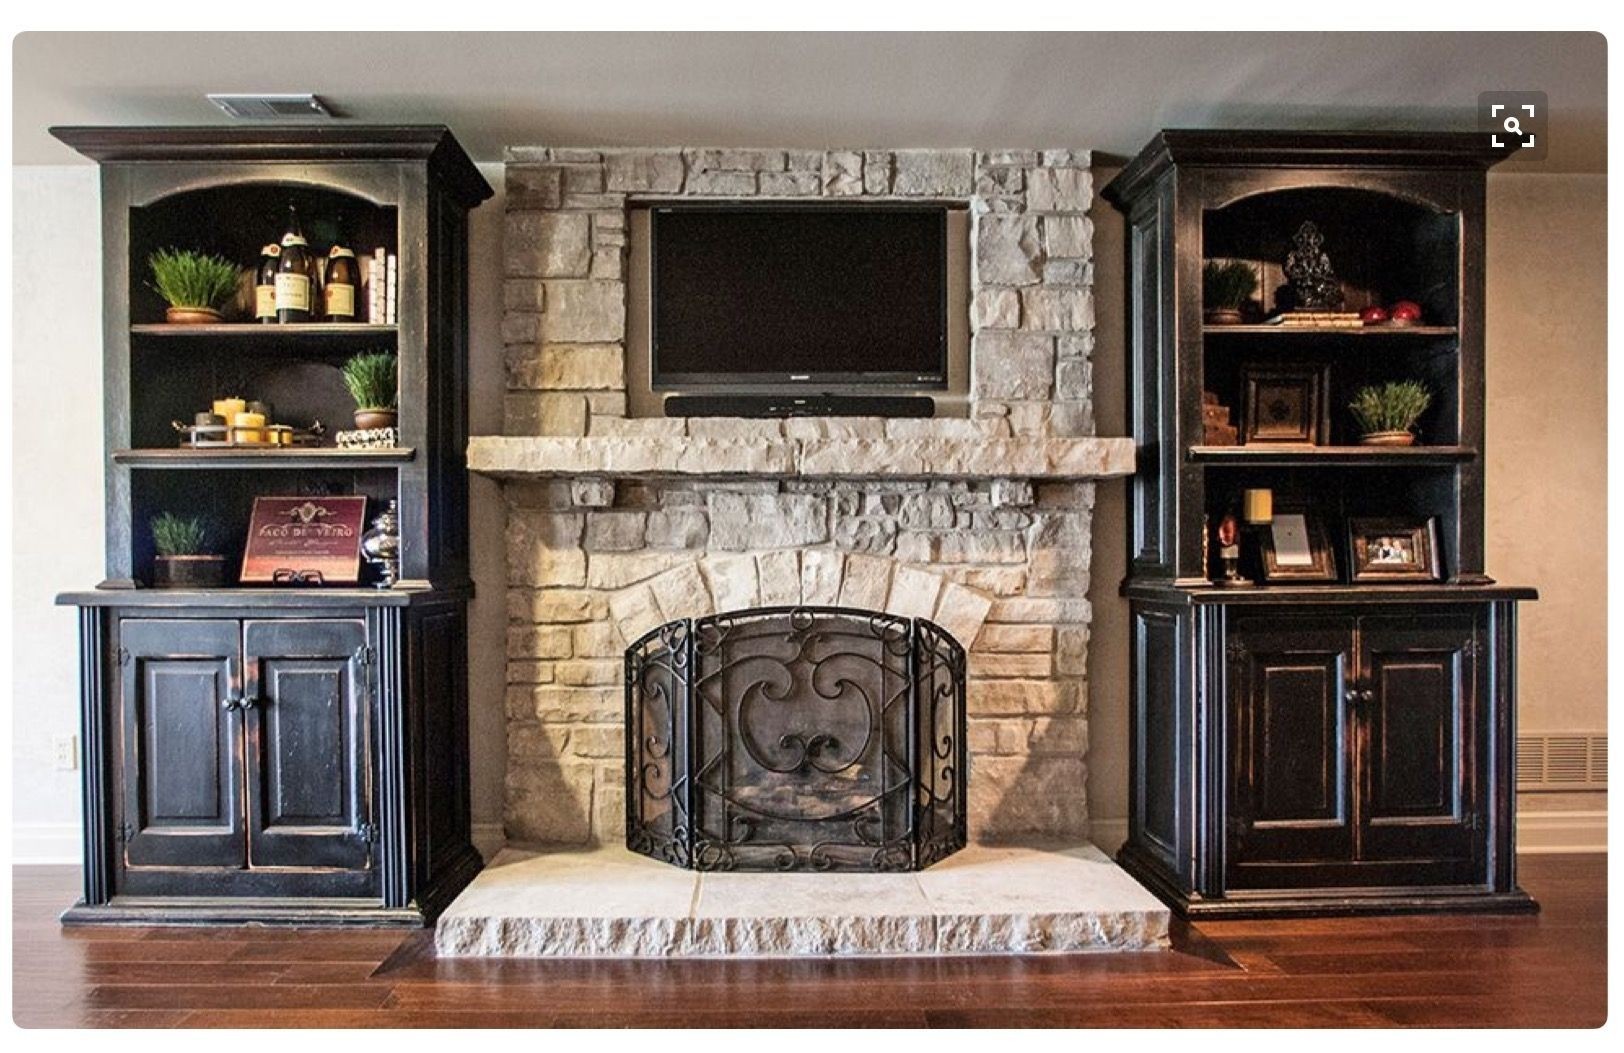 Stone fireplace with shelves